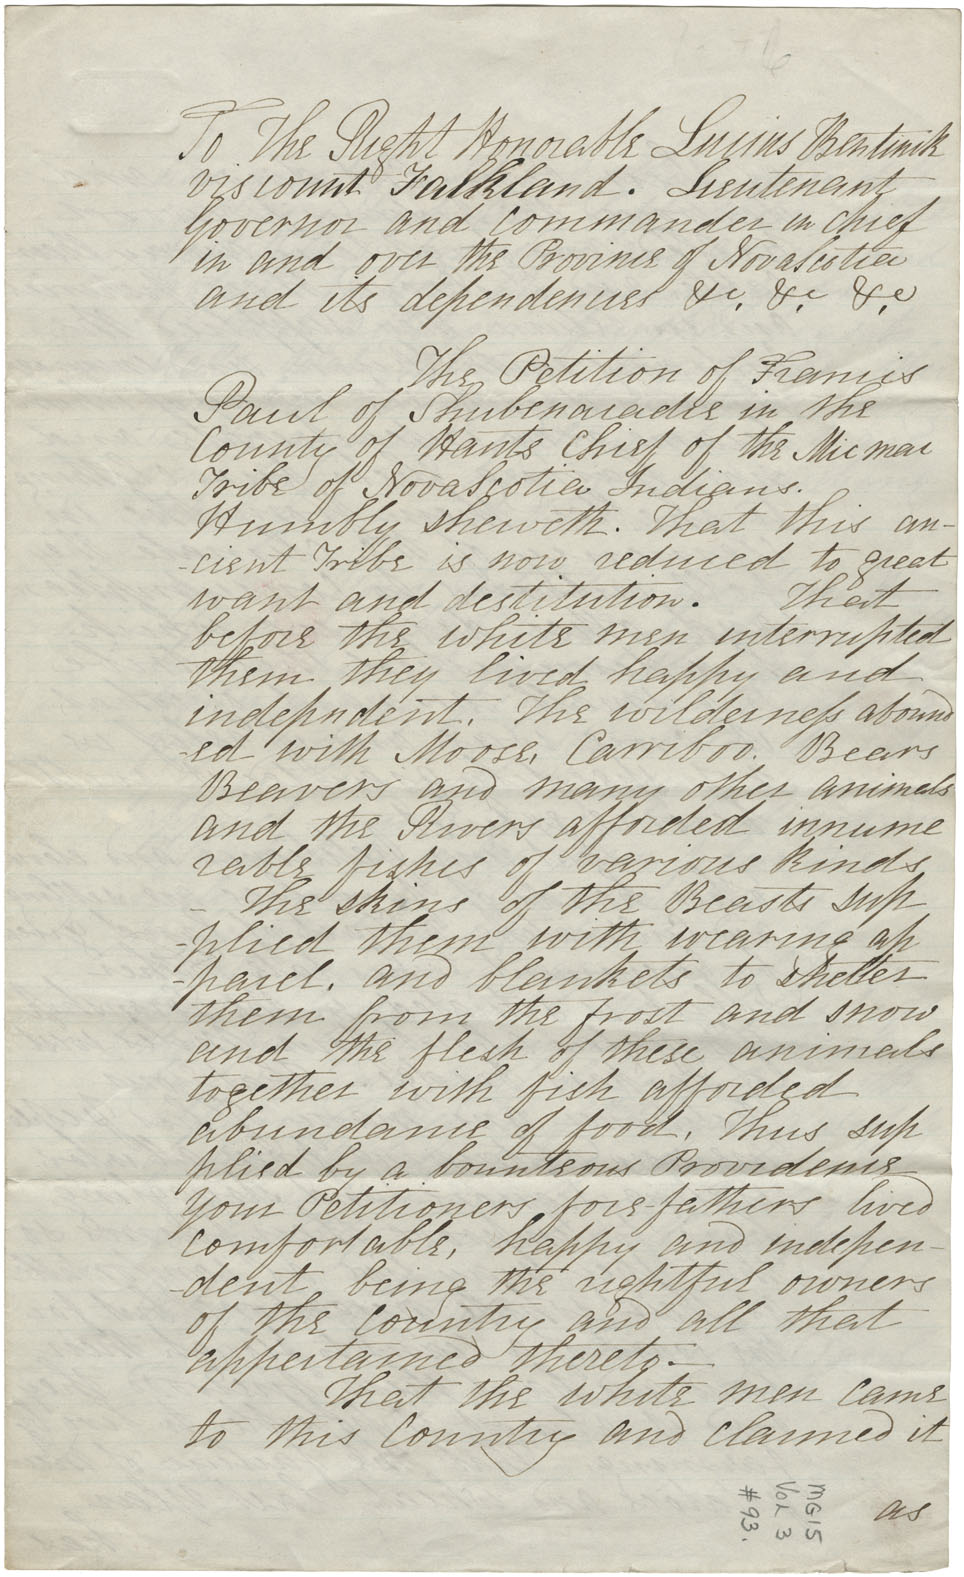 Petition of Francis Paul, Mi'kmaq Chief of Shubenacadie, for more assistance. 